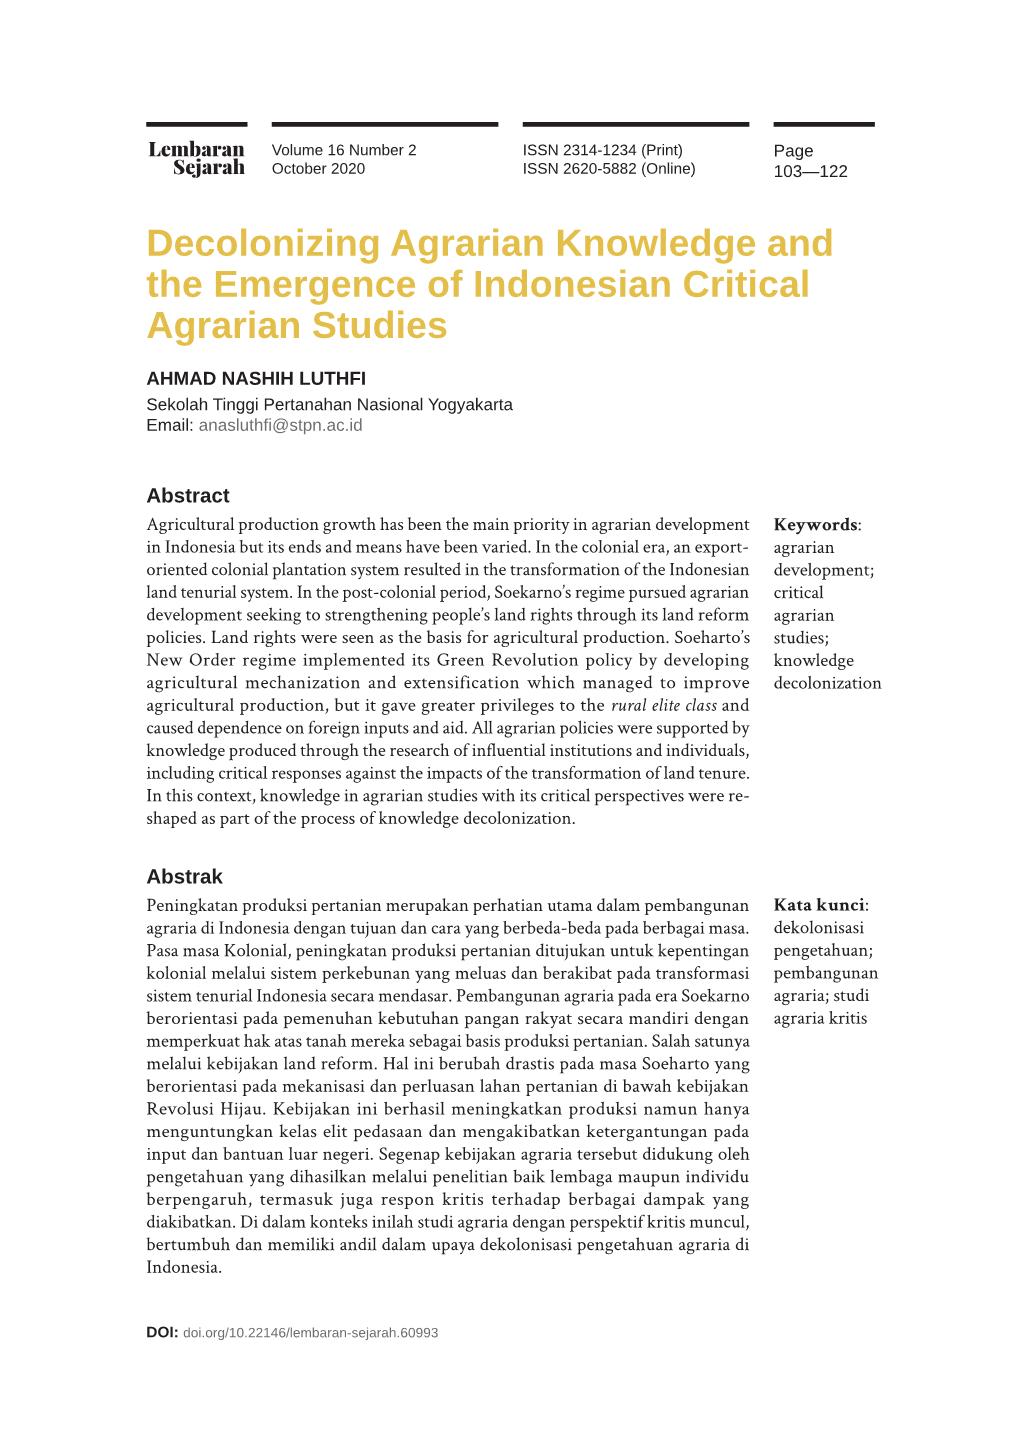 Decolonizing Agrarian Knowledge and the Emergence of Indonesian Critical Agrarian Studies